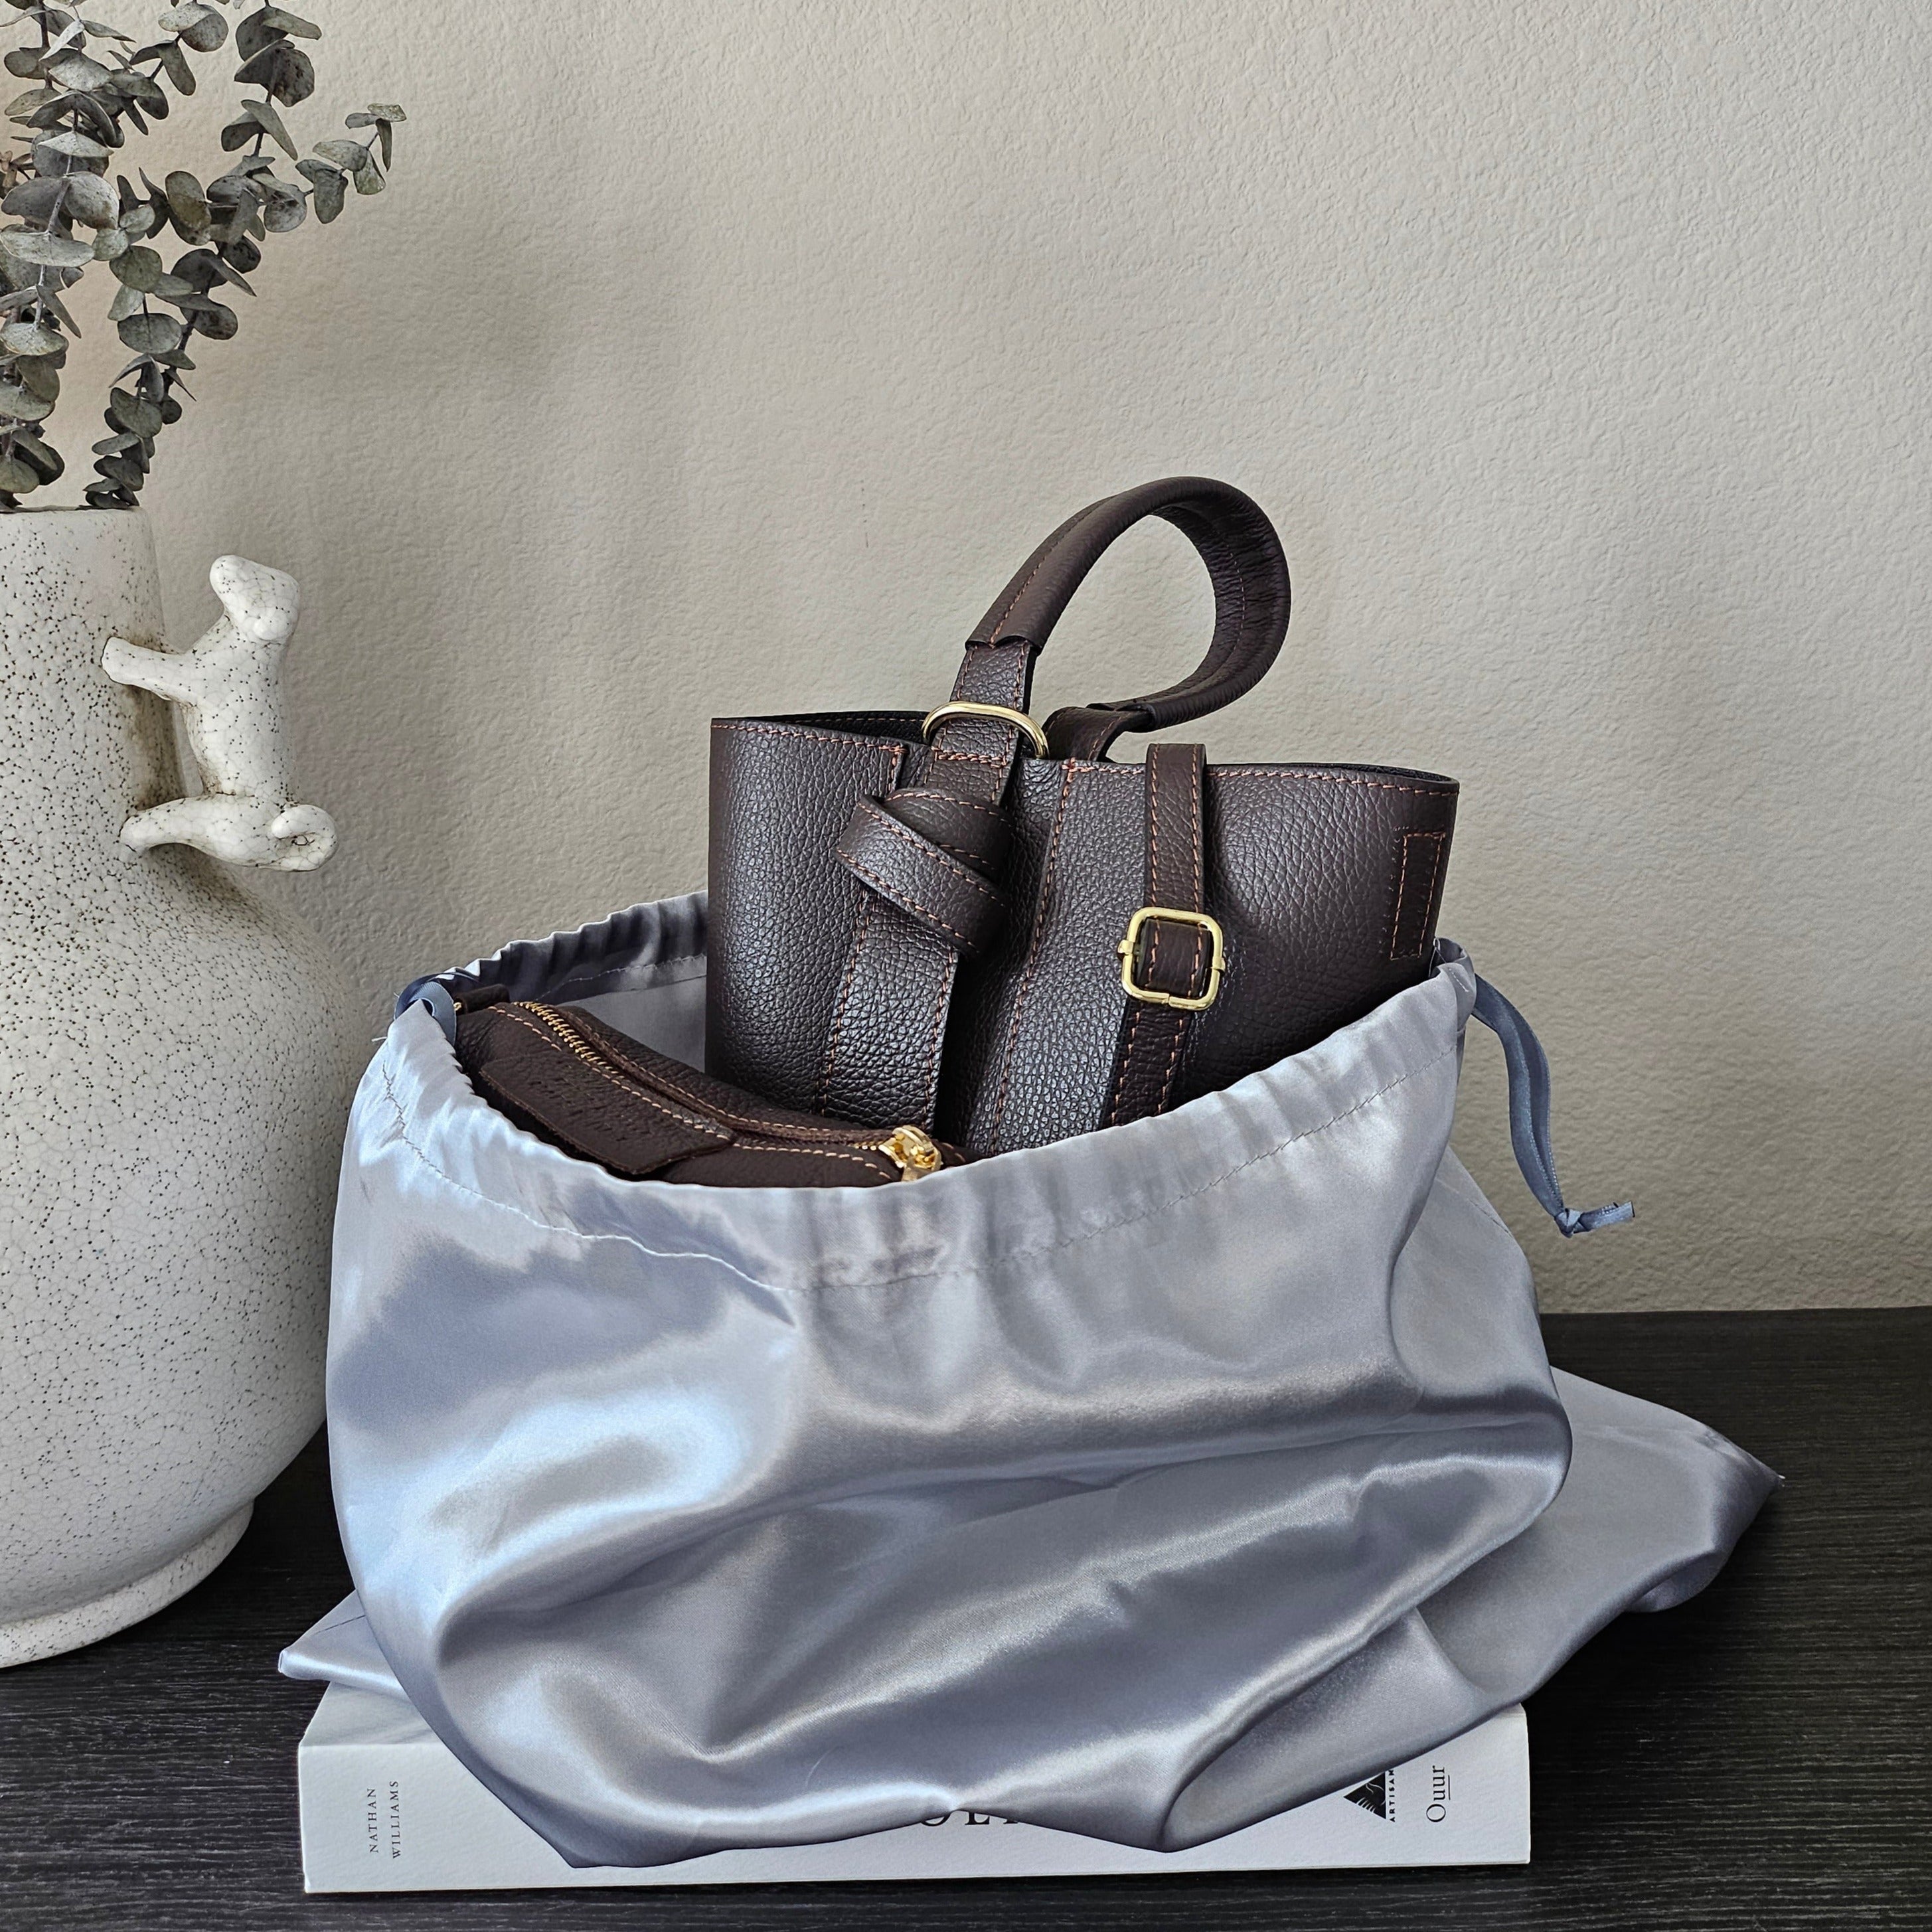 Iminglobal Italian leather Rocco Tote including pouch